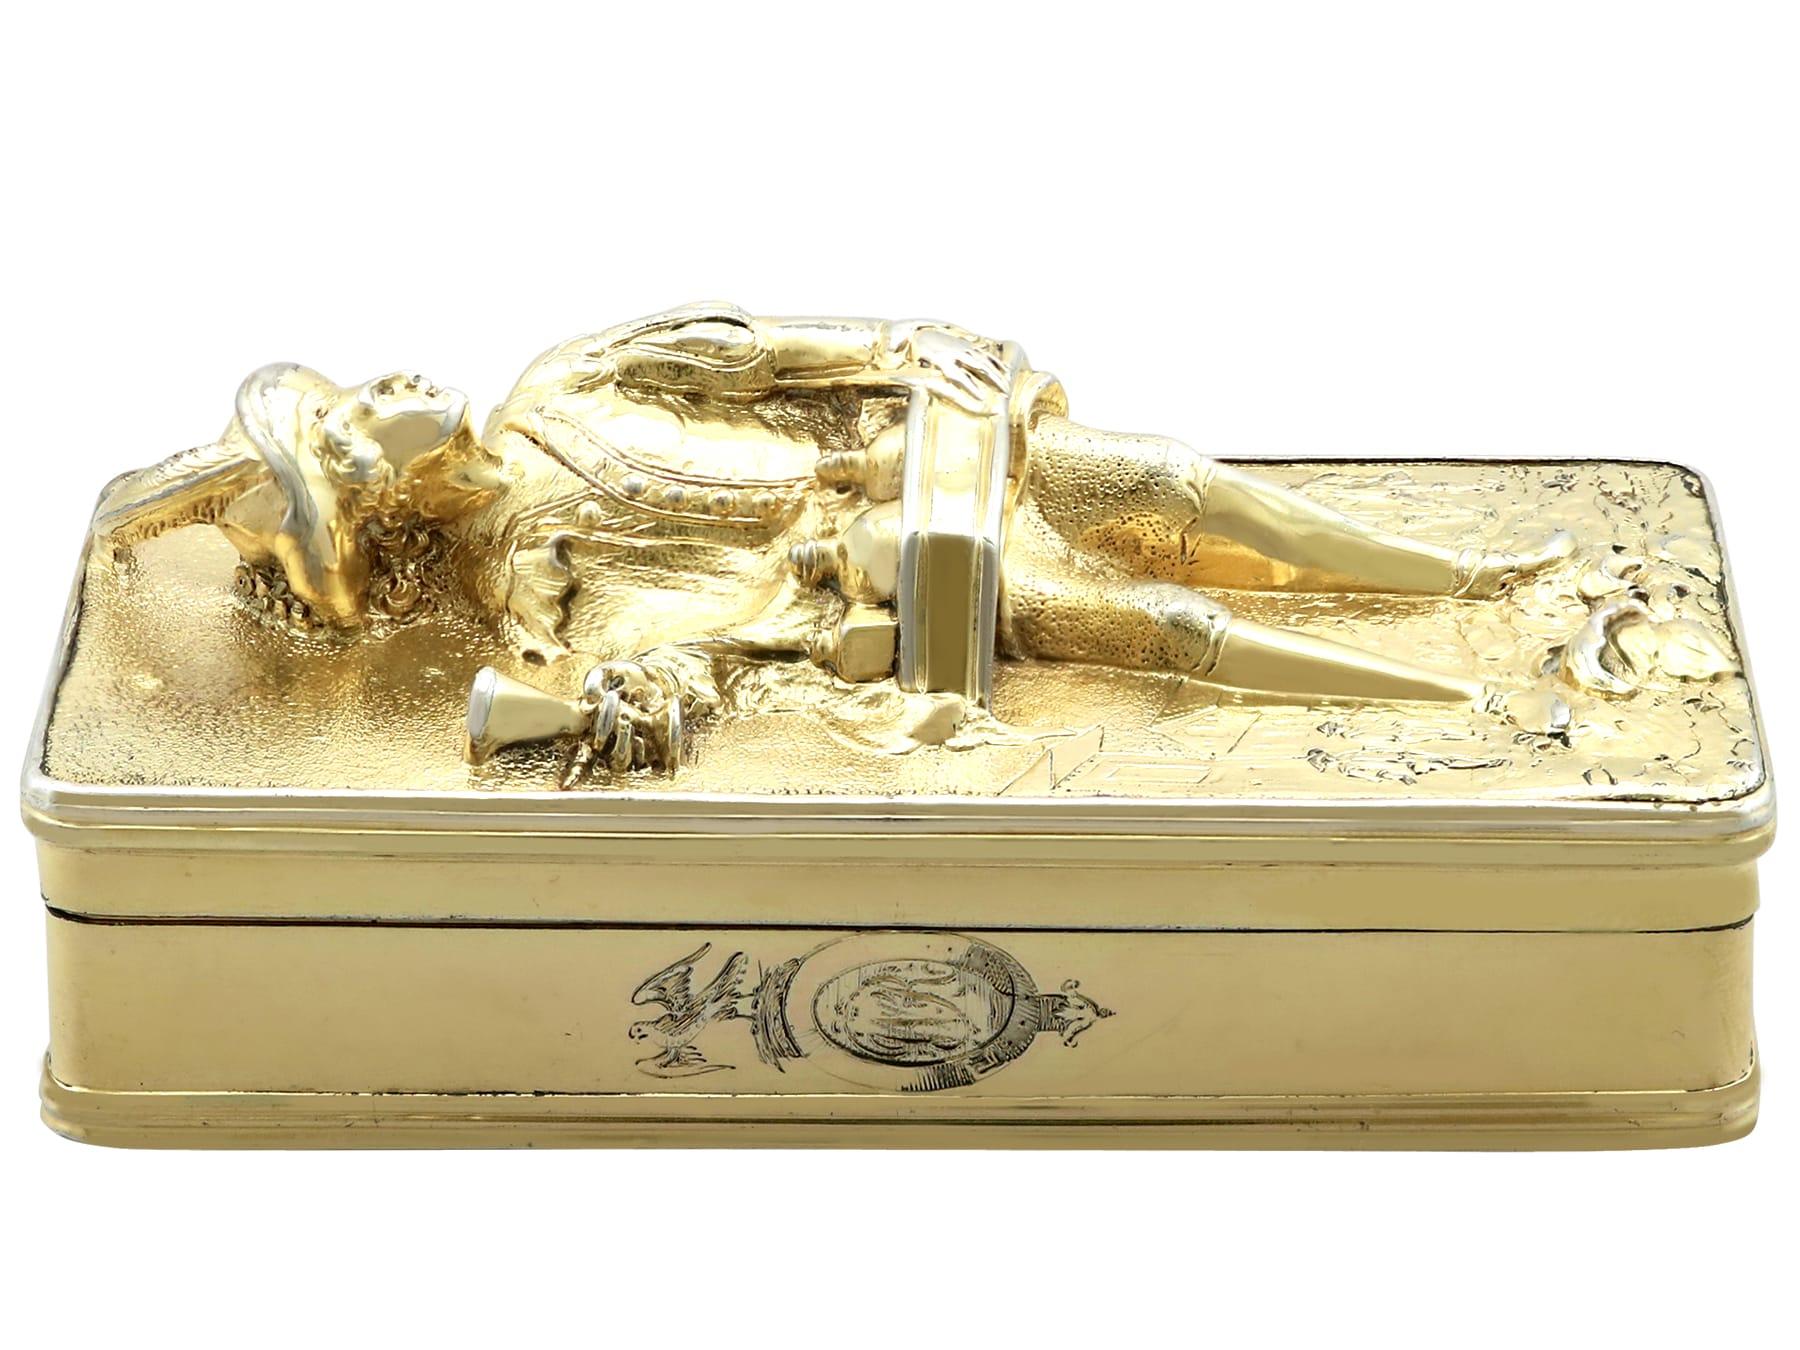 Antique George IV Sterling Silver Gilt Table Snuff Box  In Excellent Condition For Sale In Jesmond, Newcastle Upon Tyne